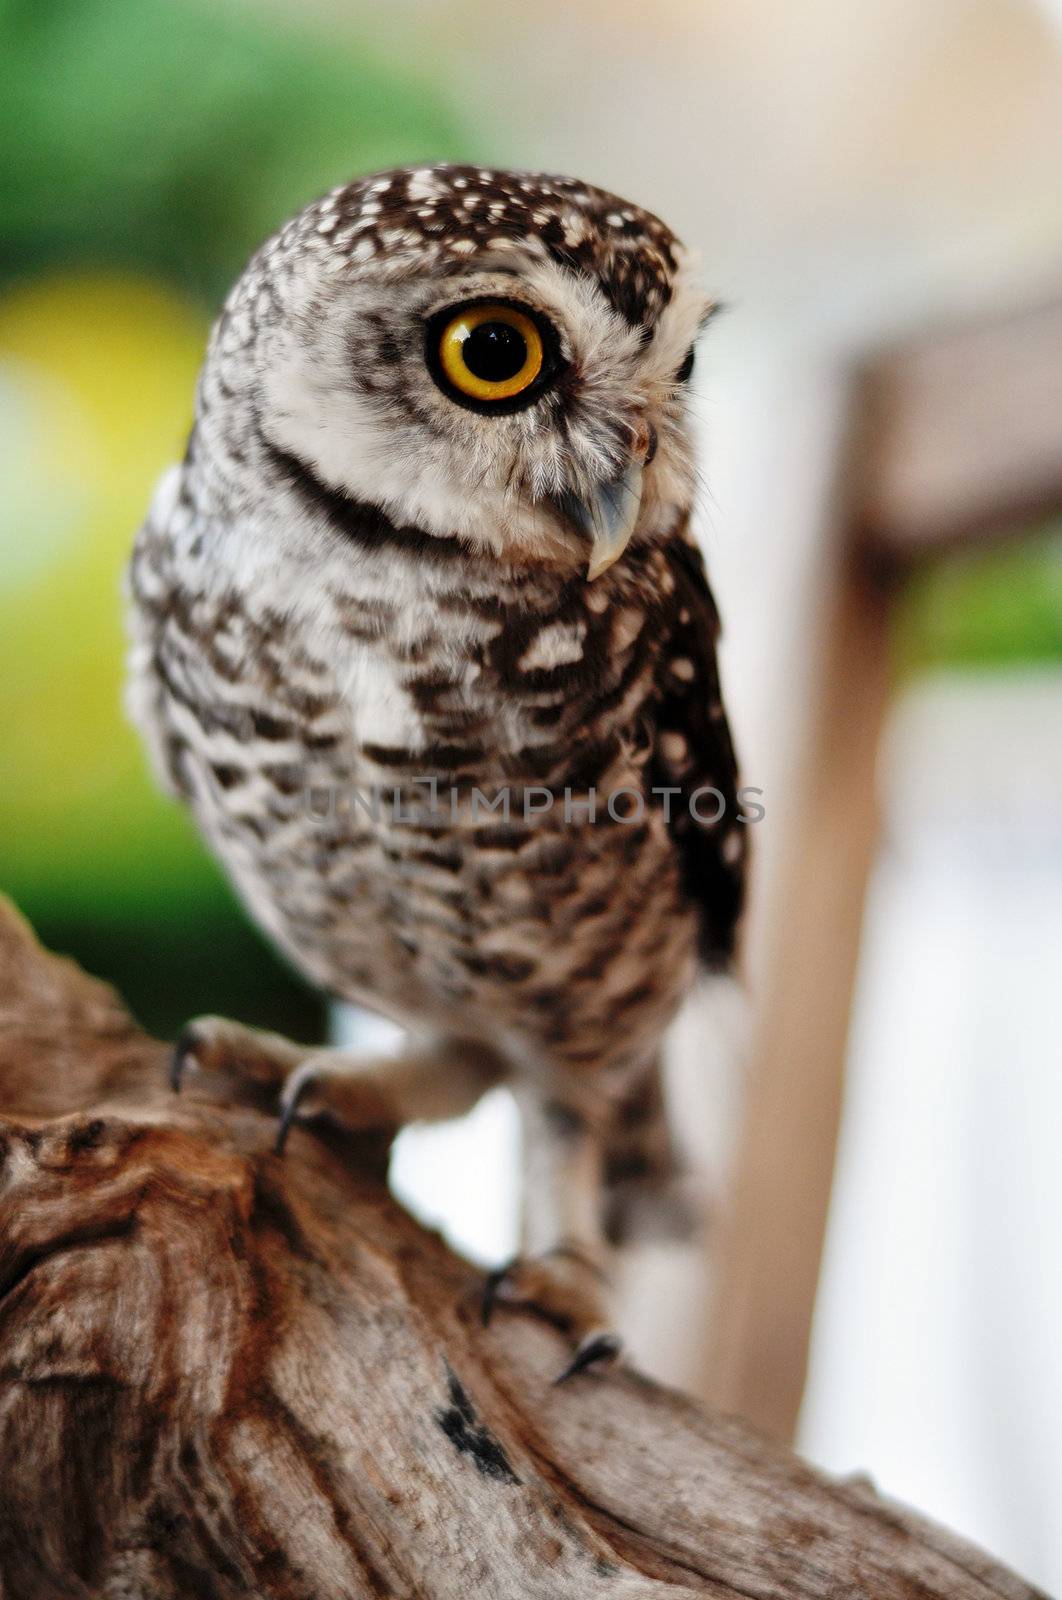 Little owl by MaZiKab